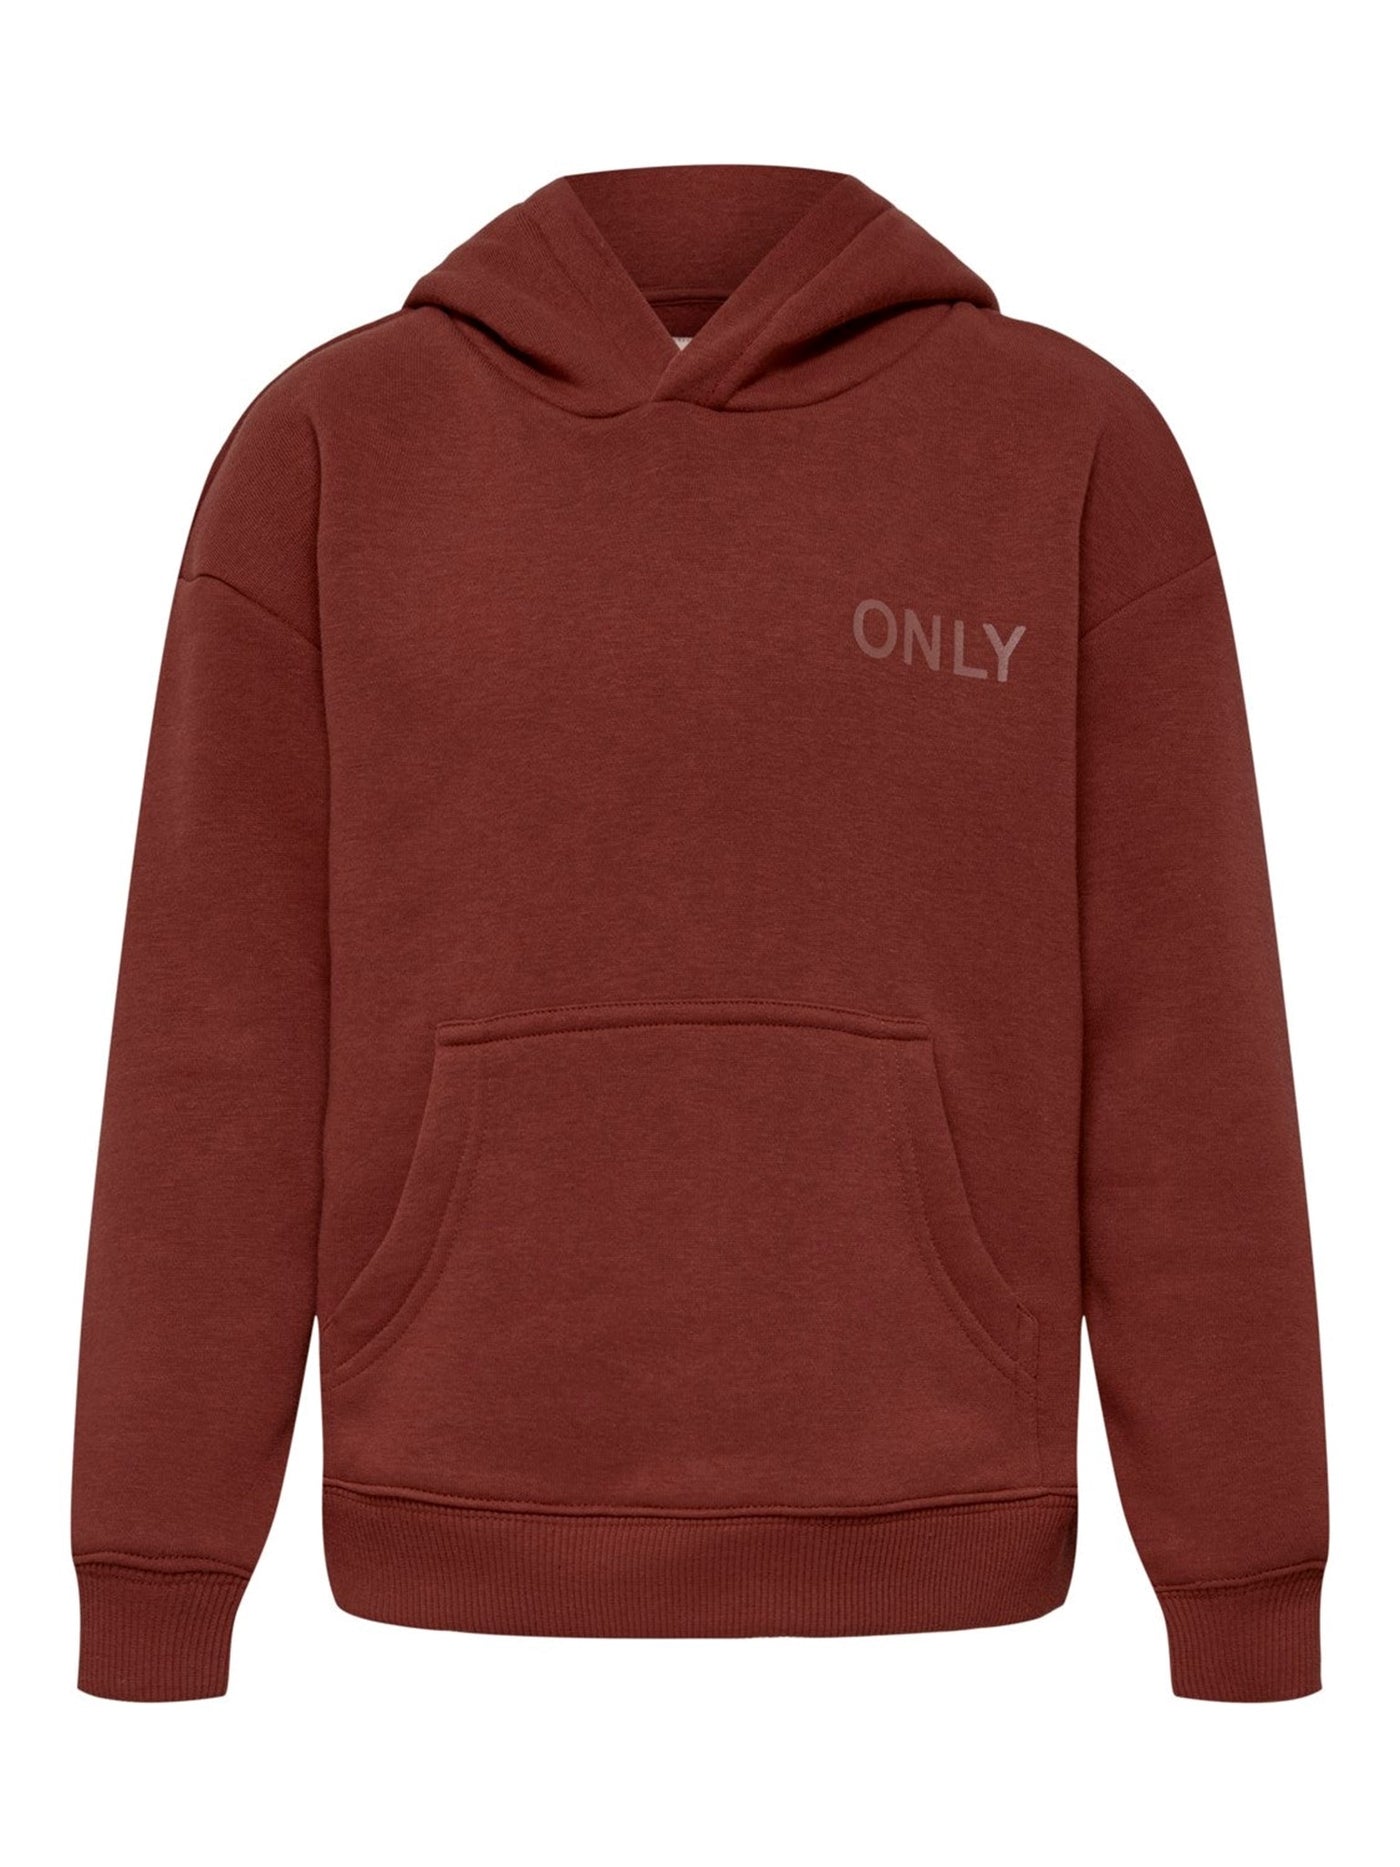 Every Life Small Logo Hoodie - Burnt Henna - Kids Only